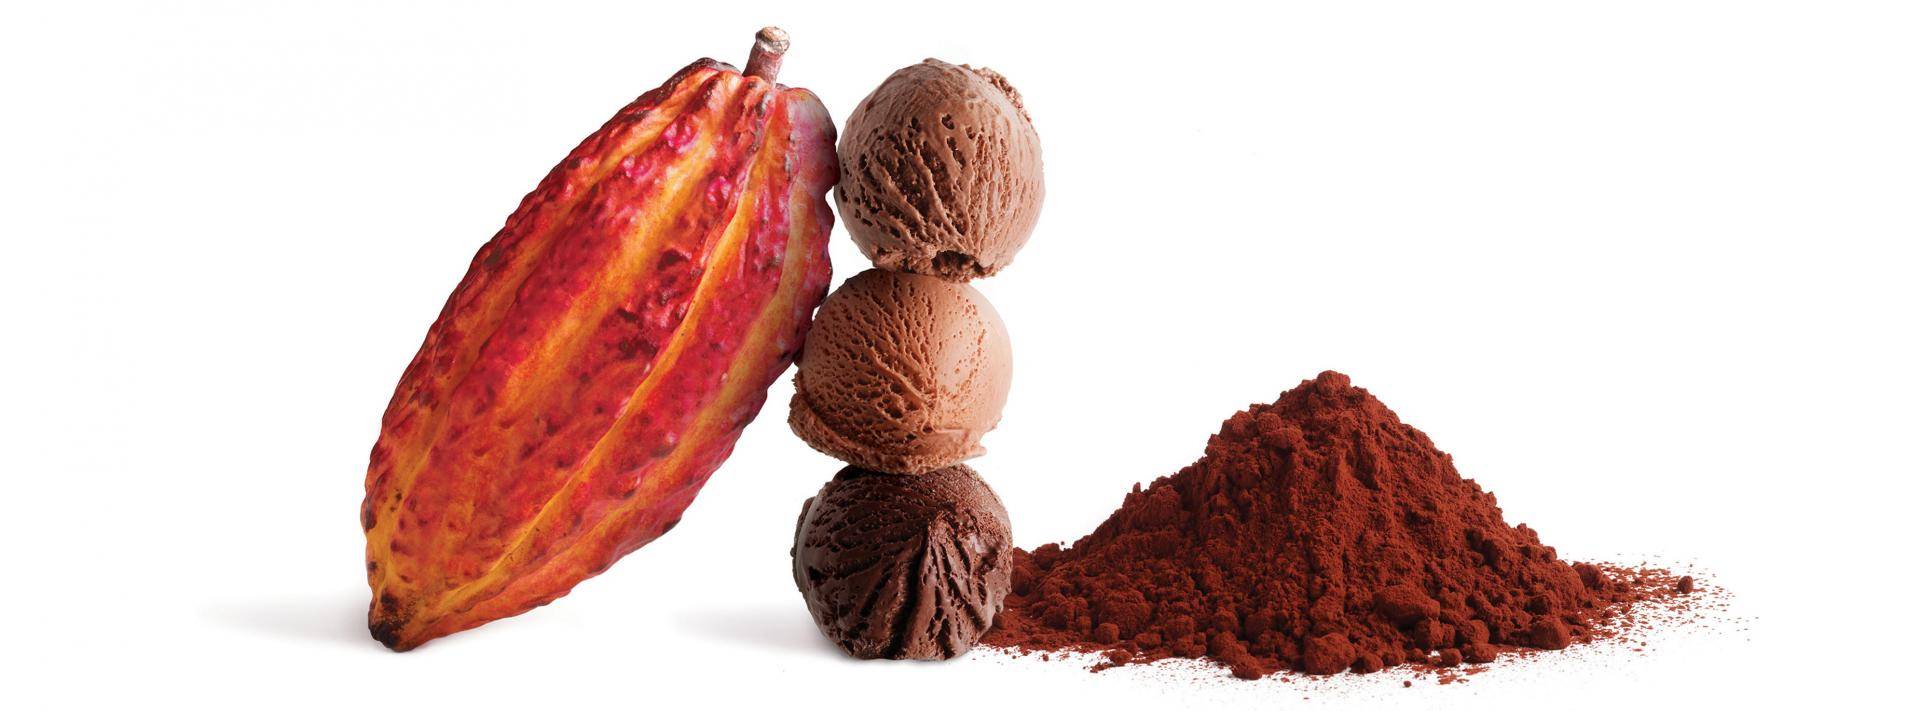 Bensdorp the finest cocoa powders for Ice cream applications